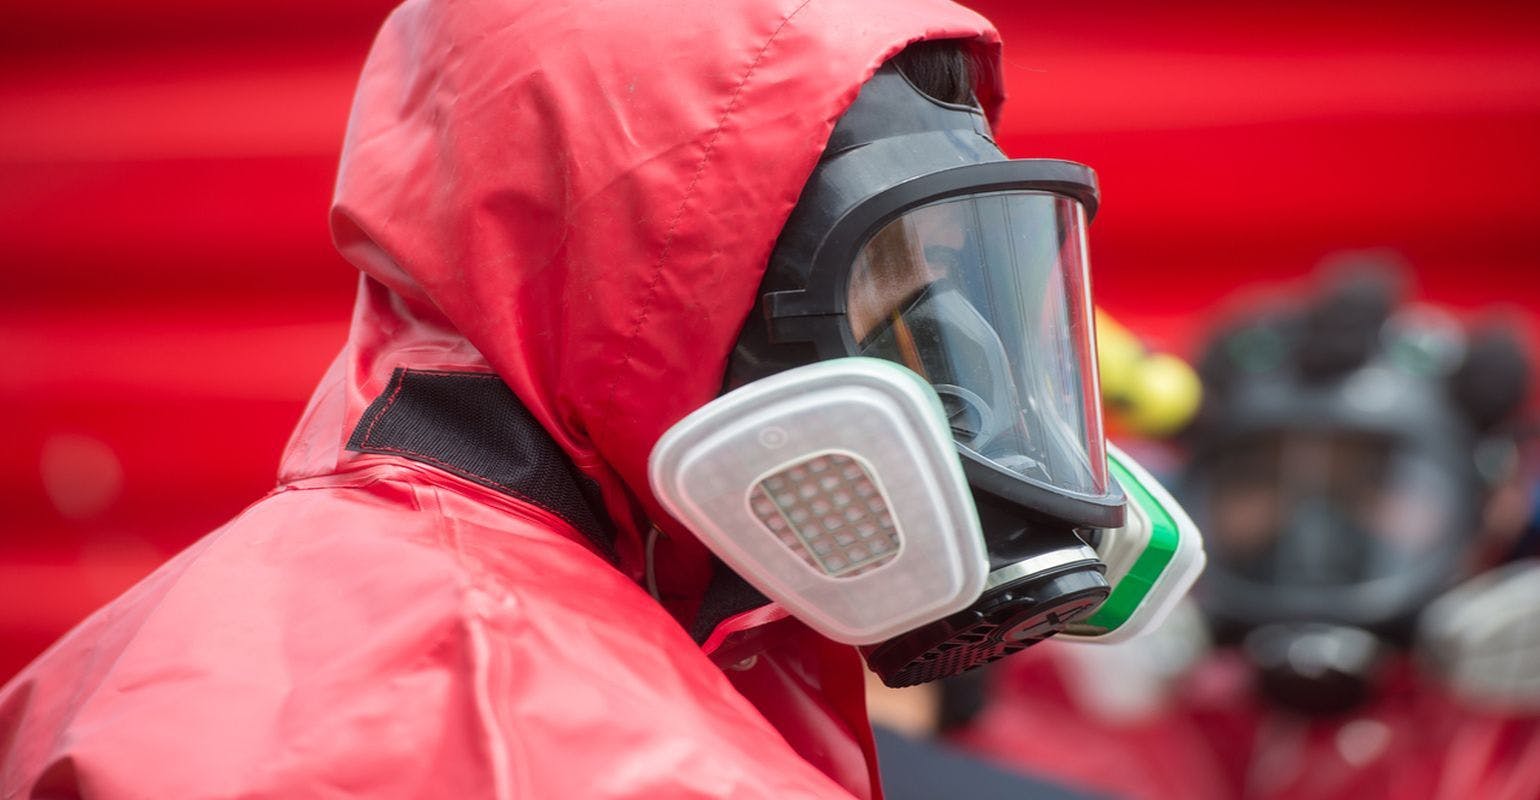 New HHS-Sponsored Research Provides New Tool and Updated Guidance on Mass Chemical Decontamination